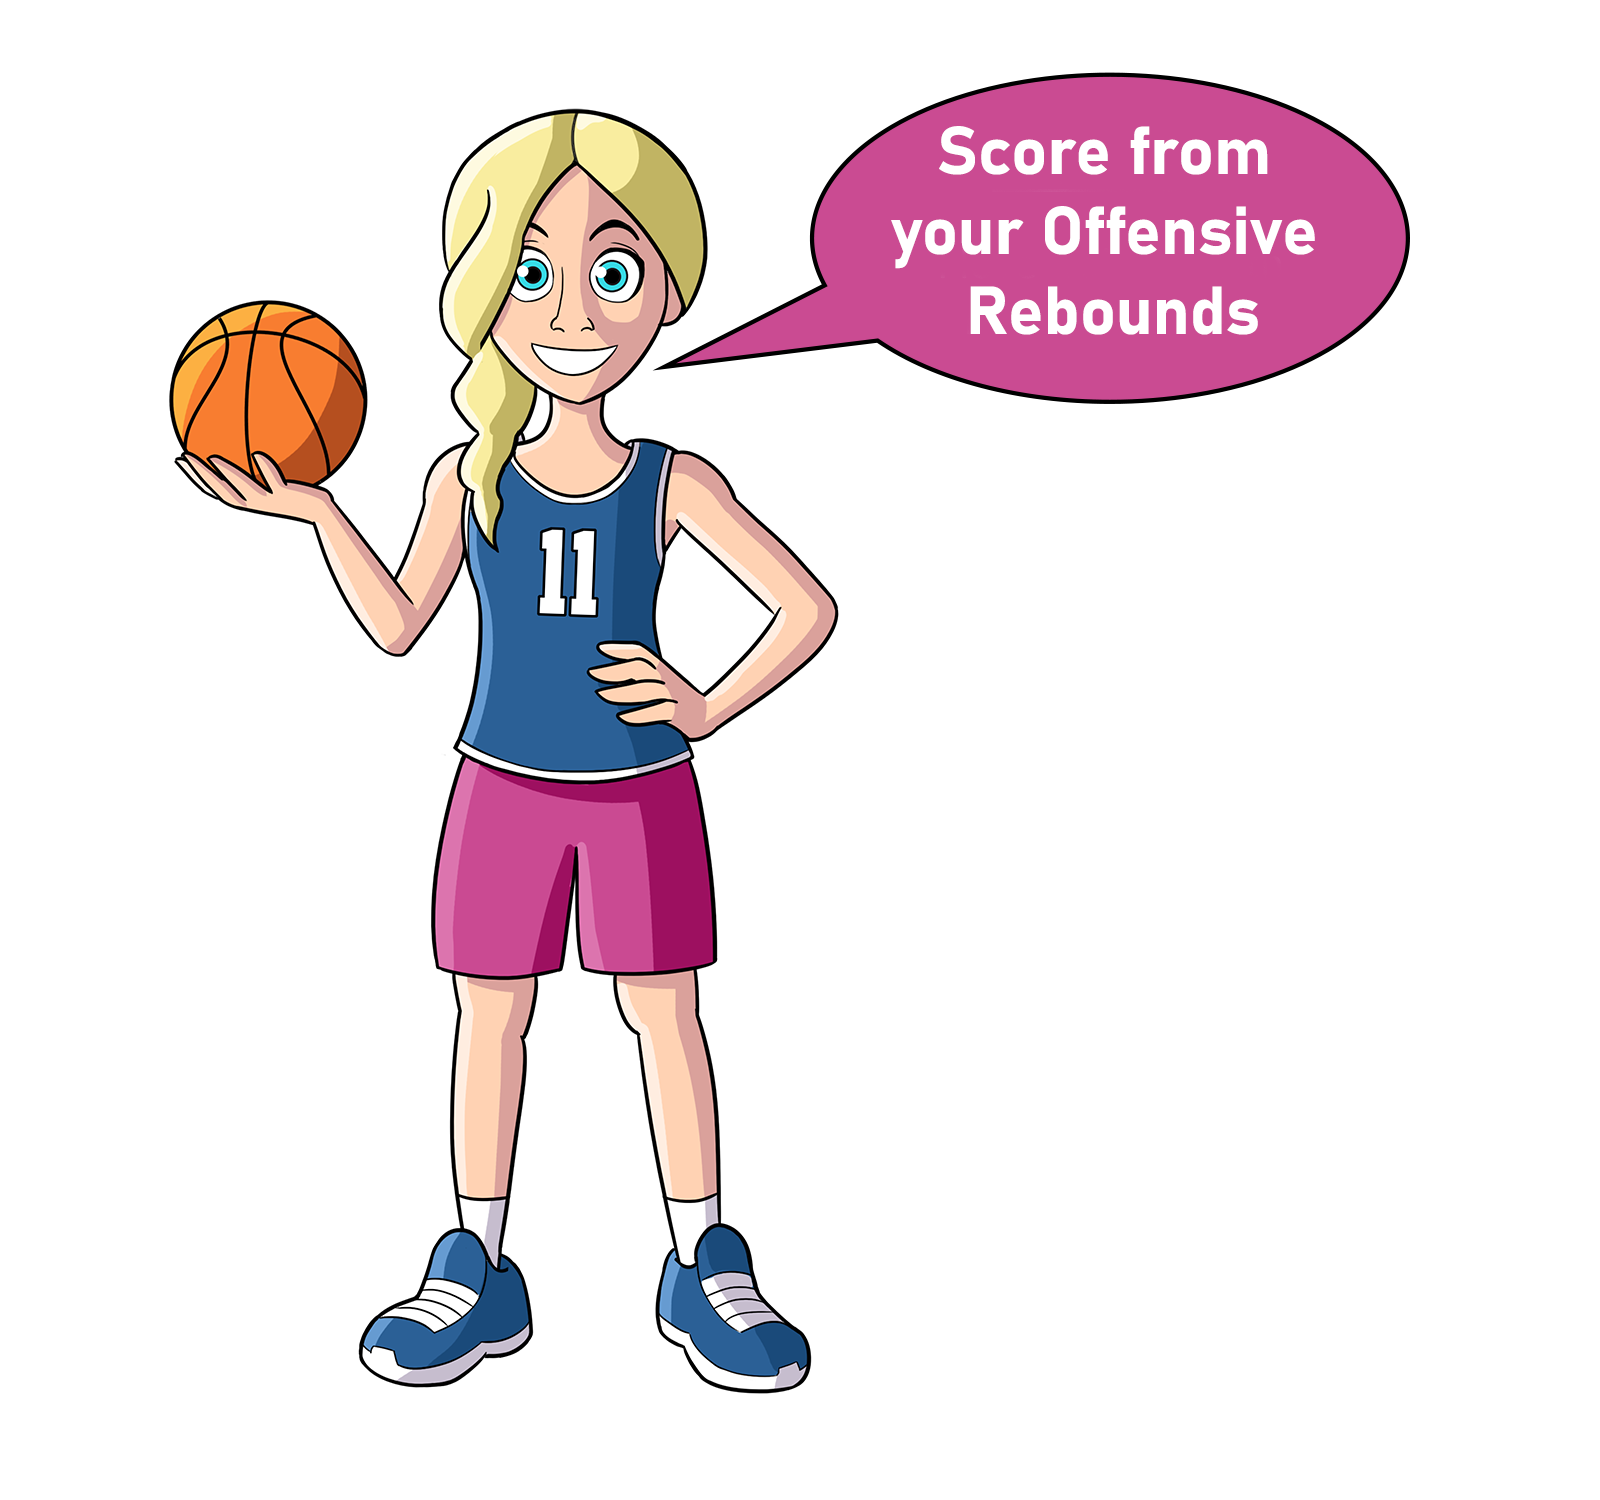 Score from your Offensive Rebounds character 11